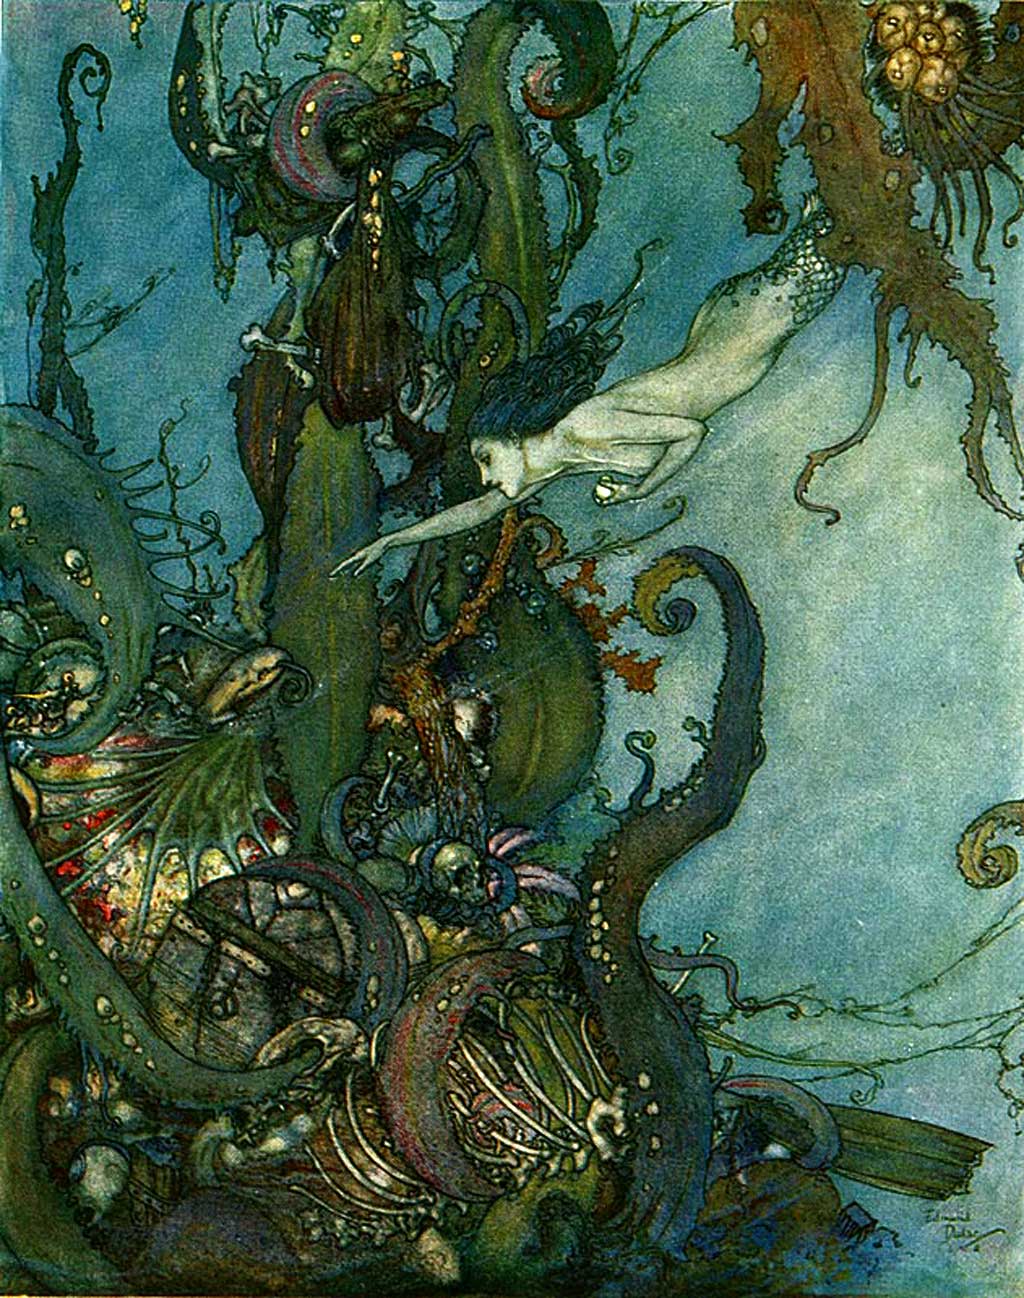 A mermaid swims down into deep water towards a collection of sea plants and treasures.